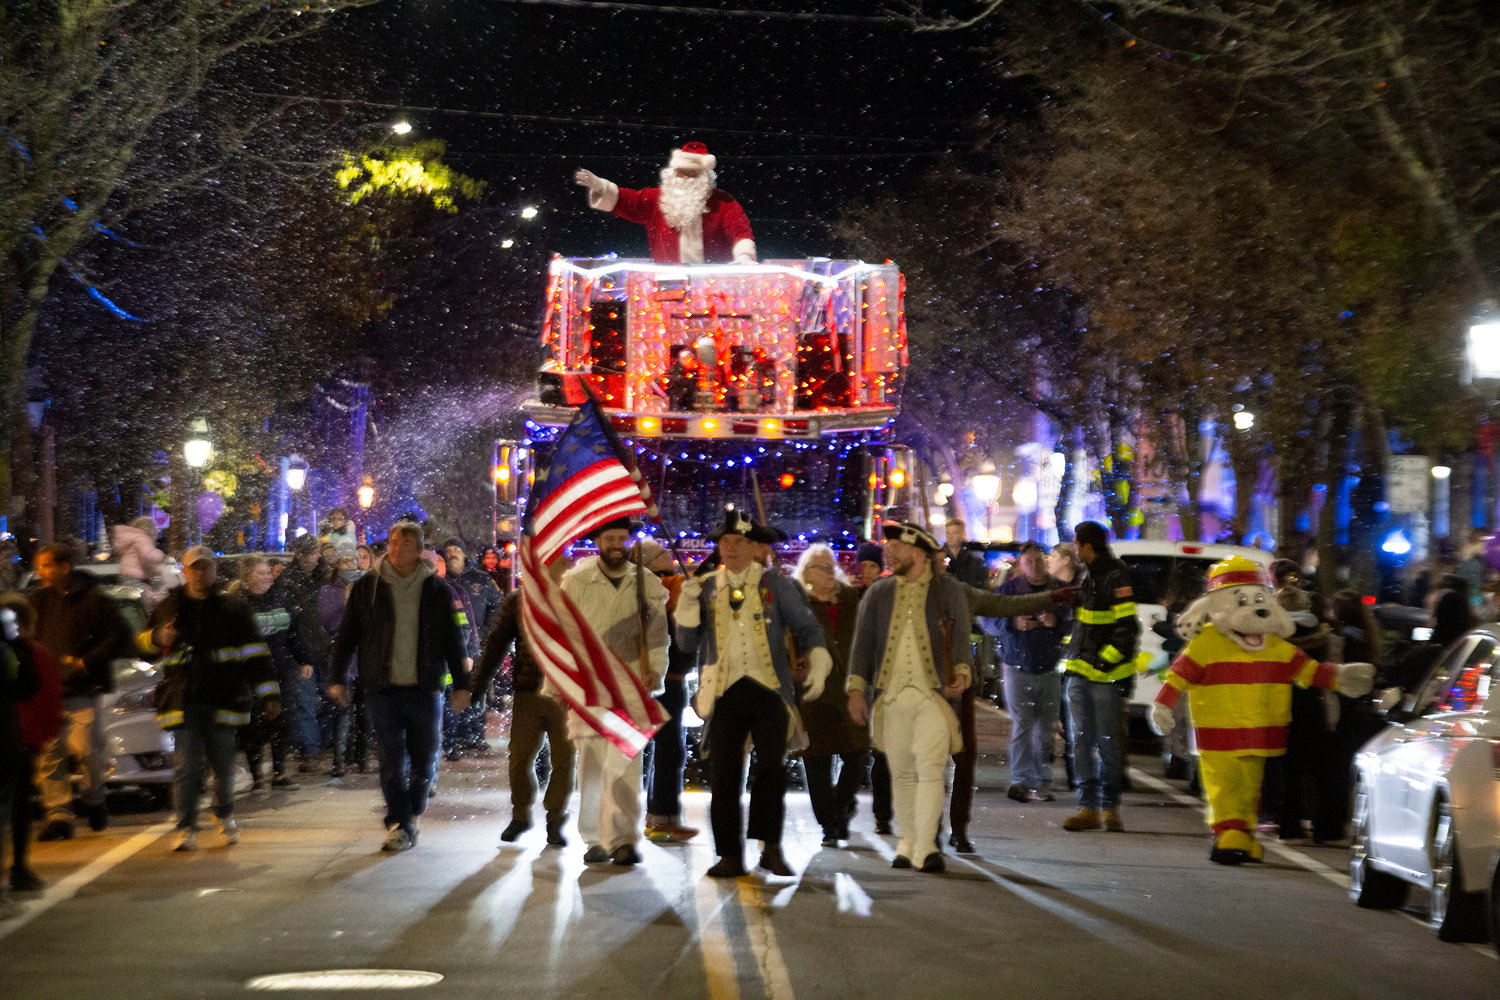 Santa Claus rides on top of Ladder One down Main Street during the Warren Holiday Festival parade, led by the Warren Federal Blues, town council and members of the general assembly.